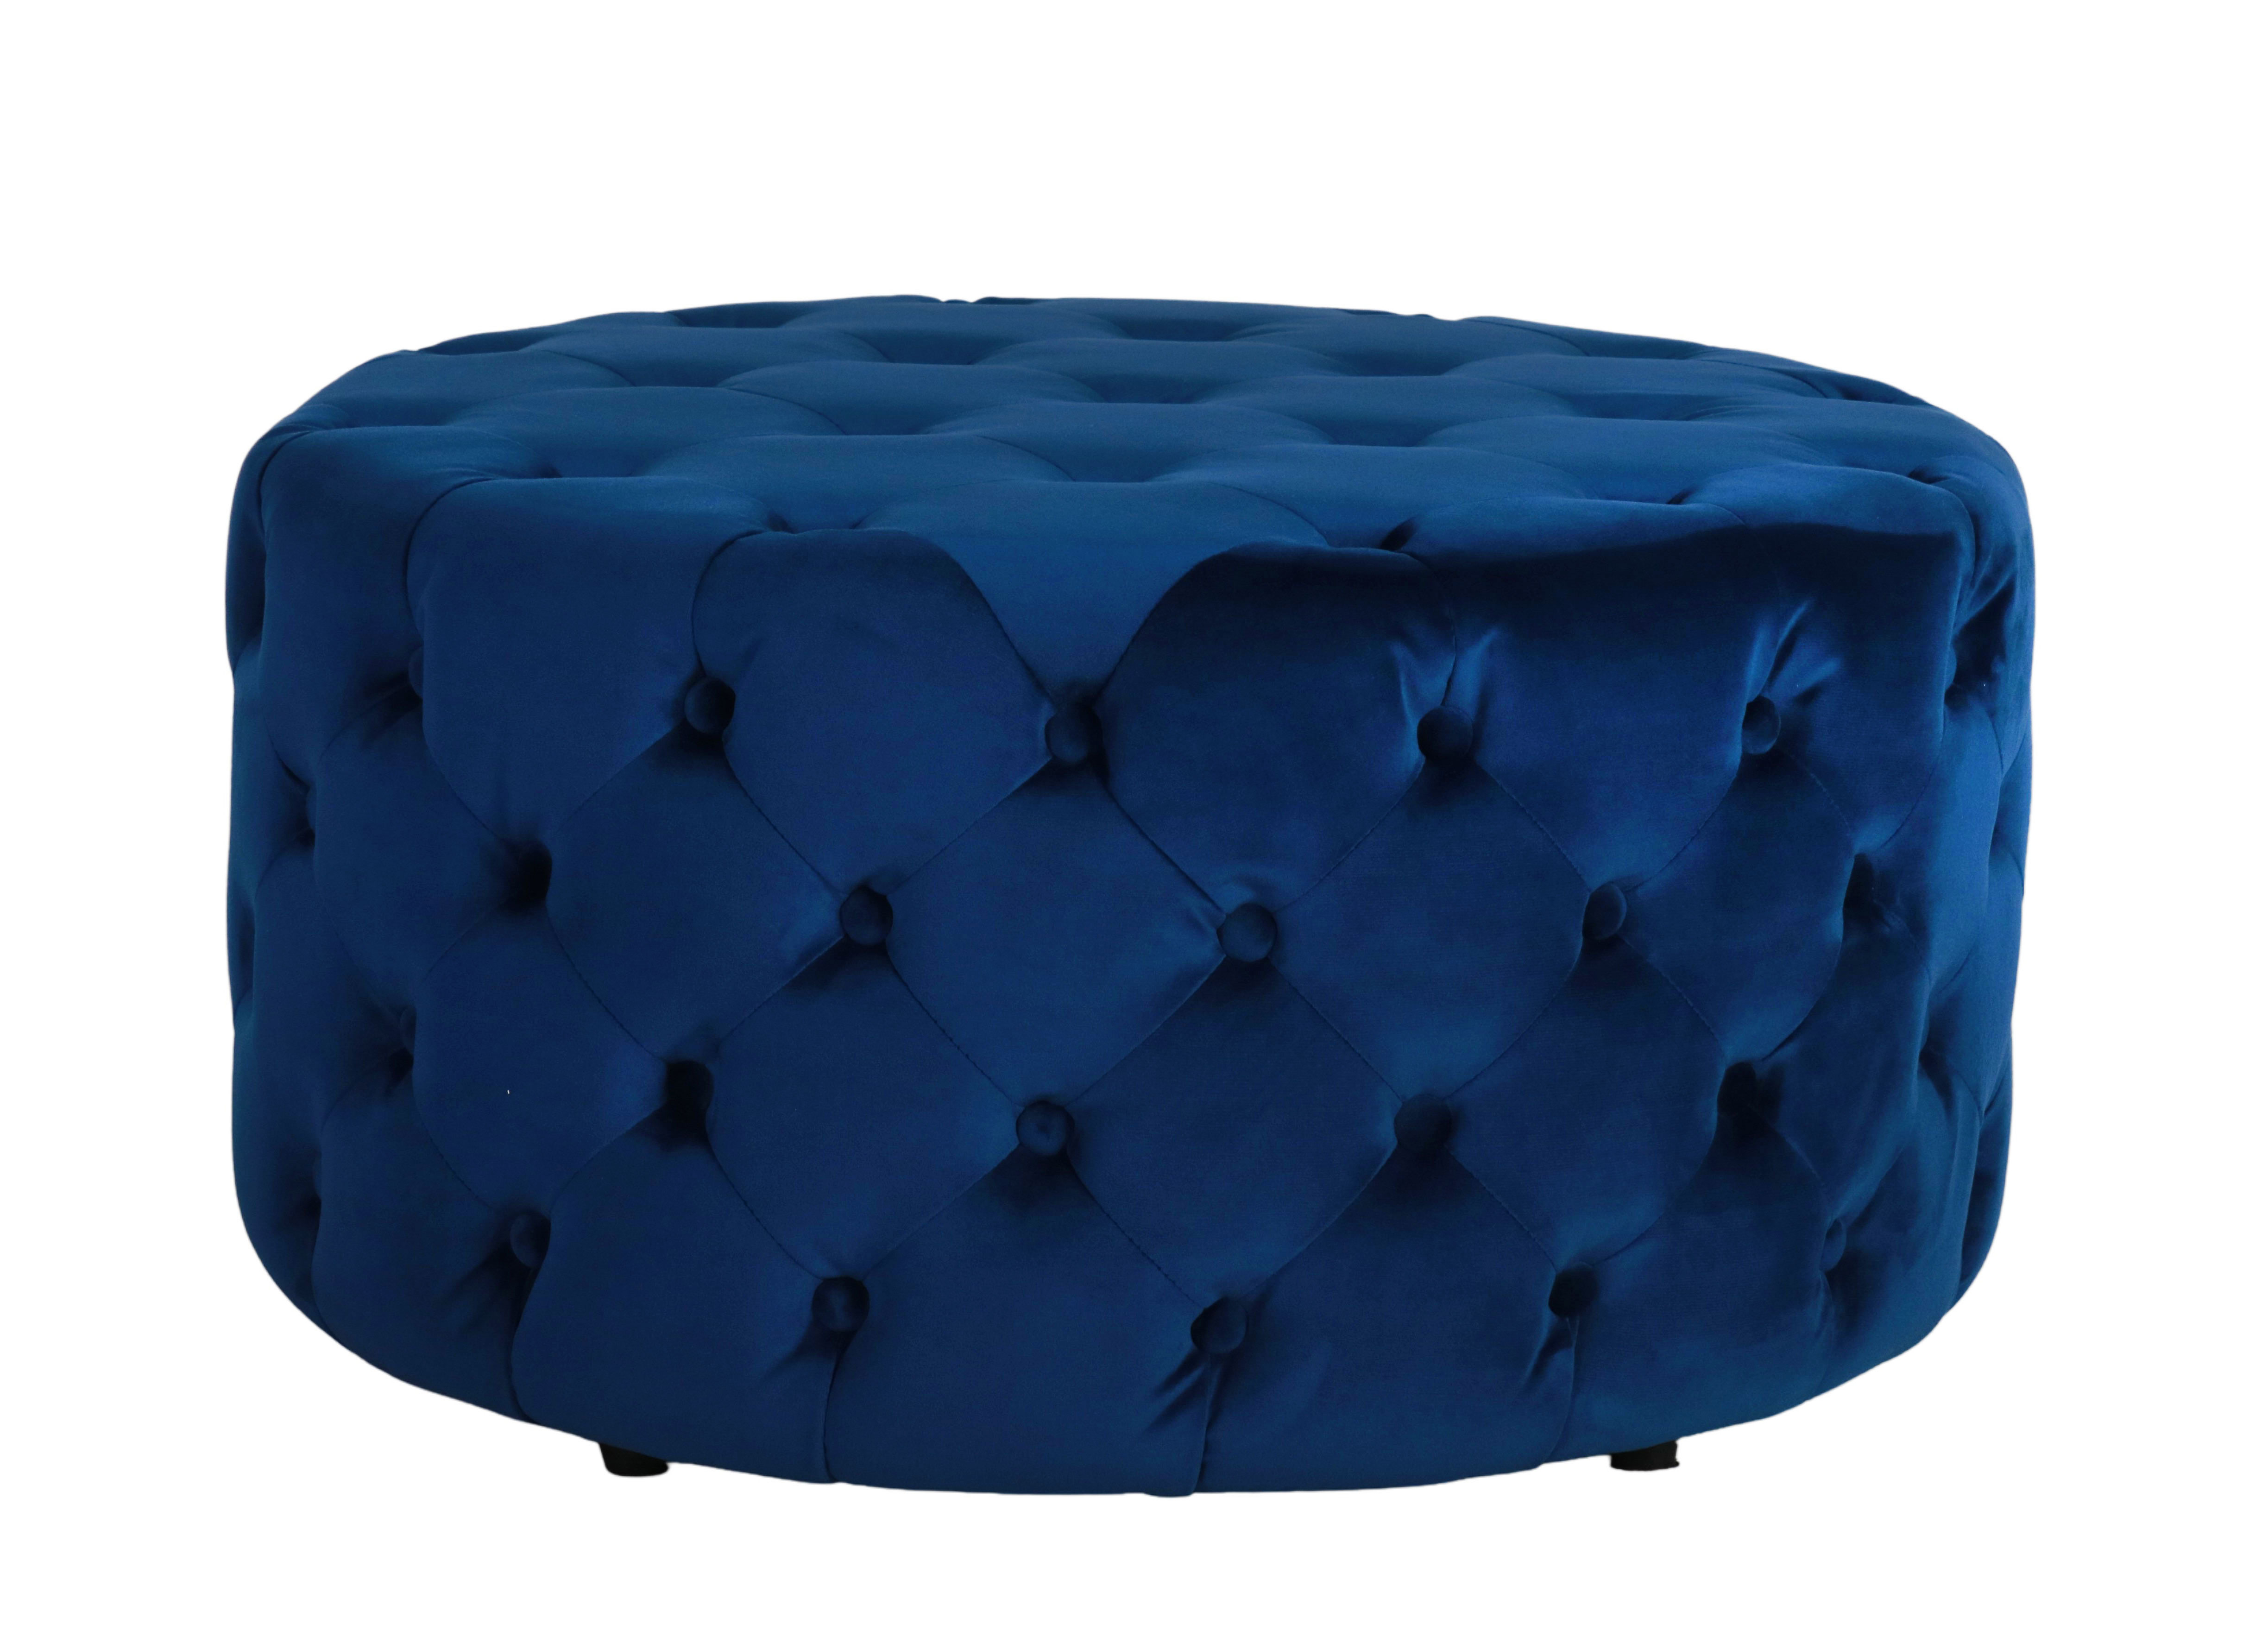 navy upholstered round ottoman with button detail Château Collection